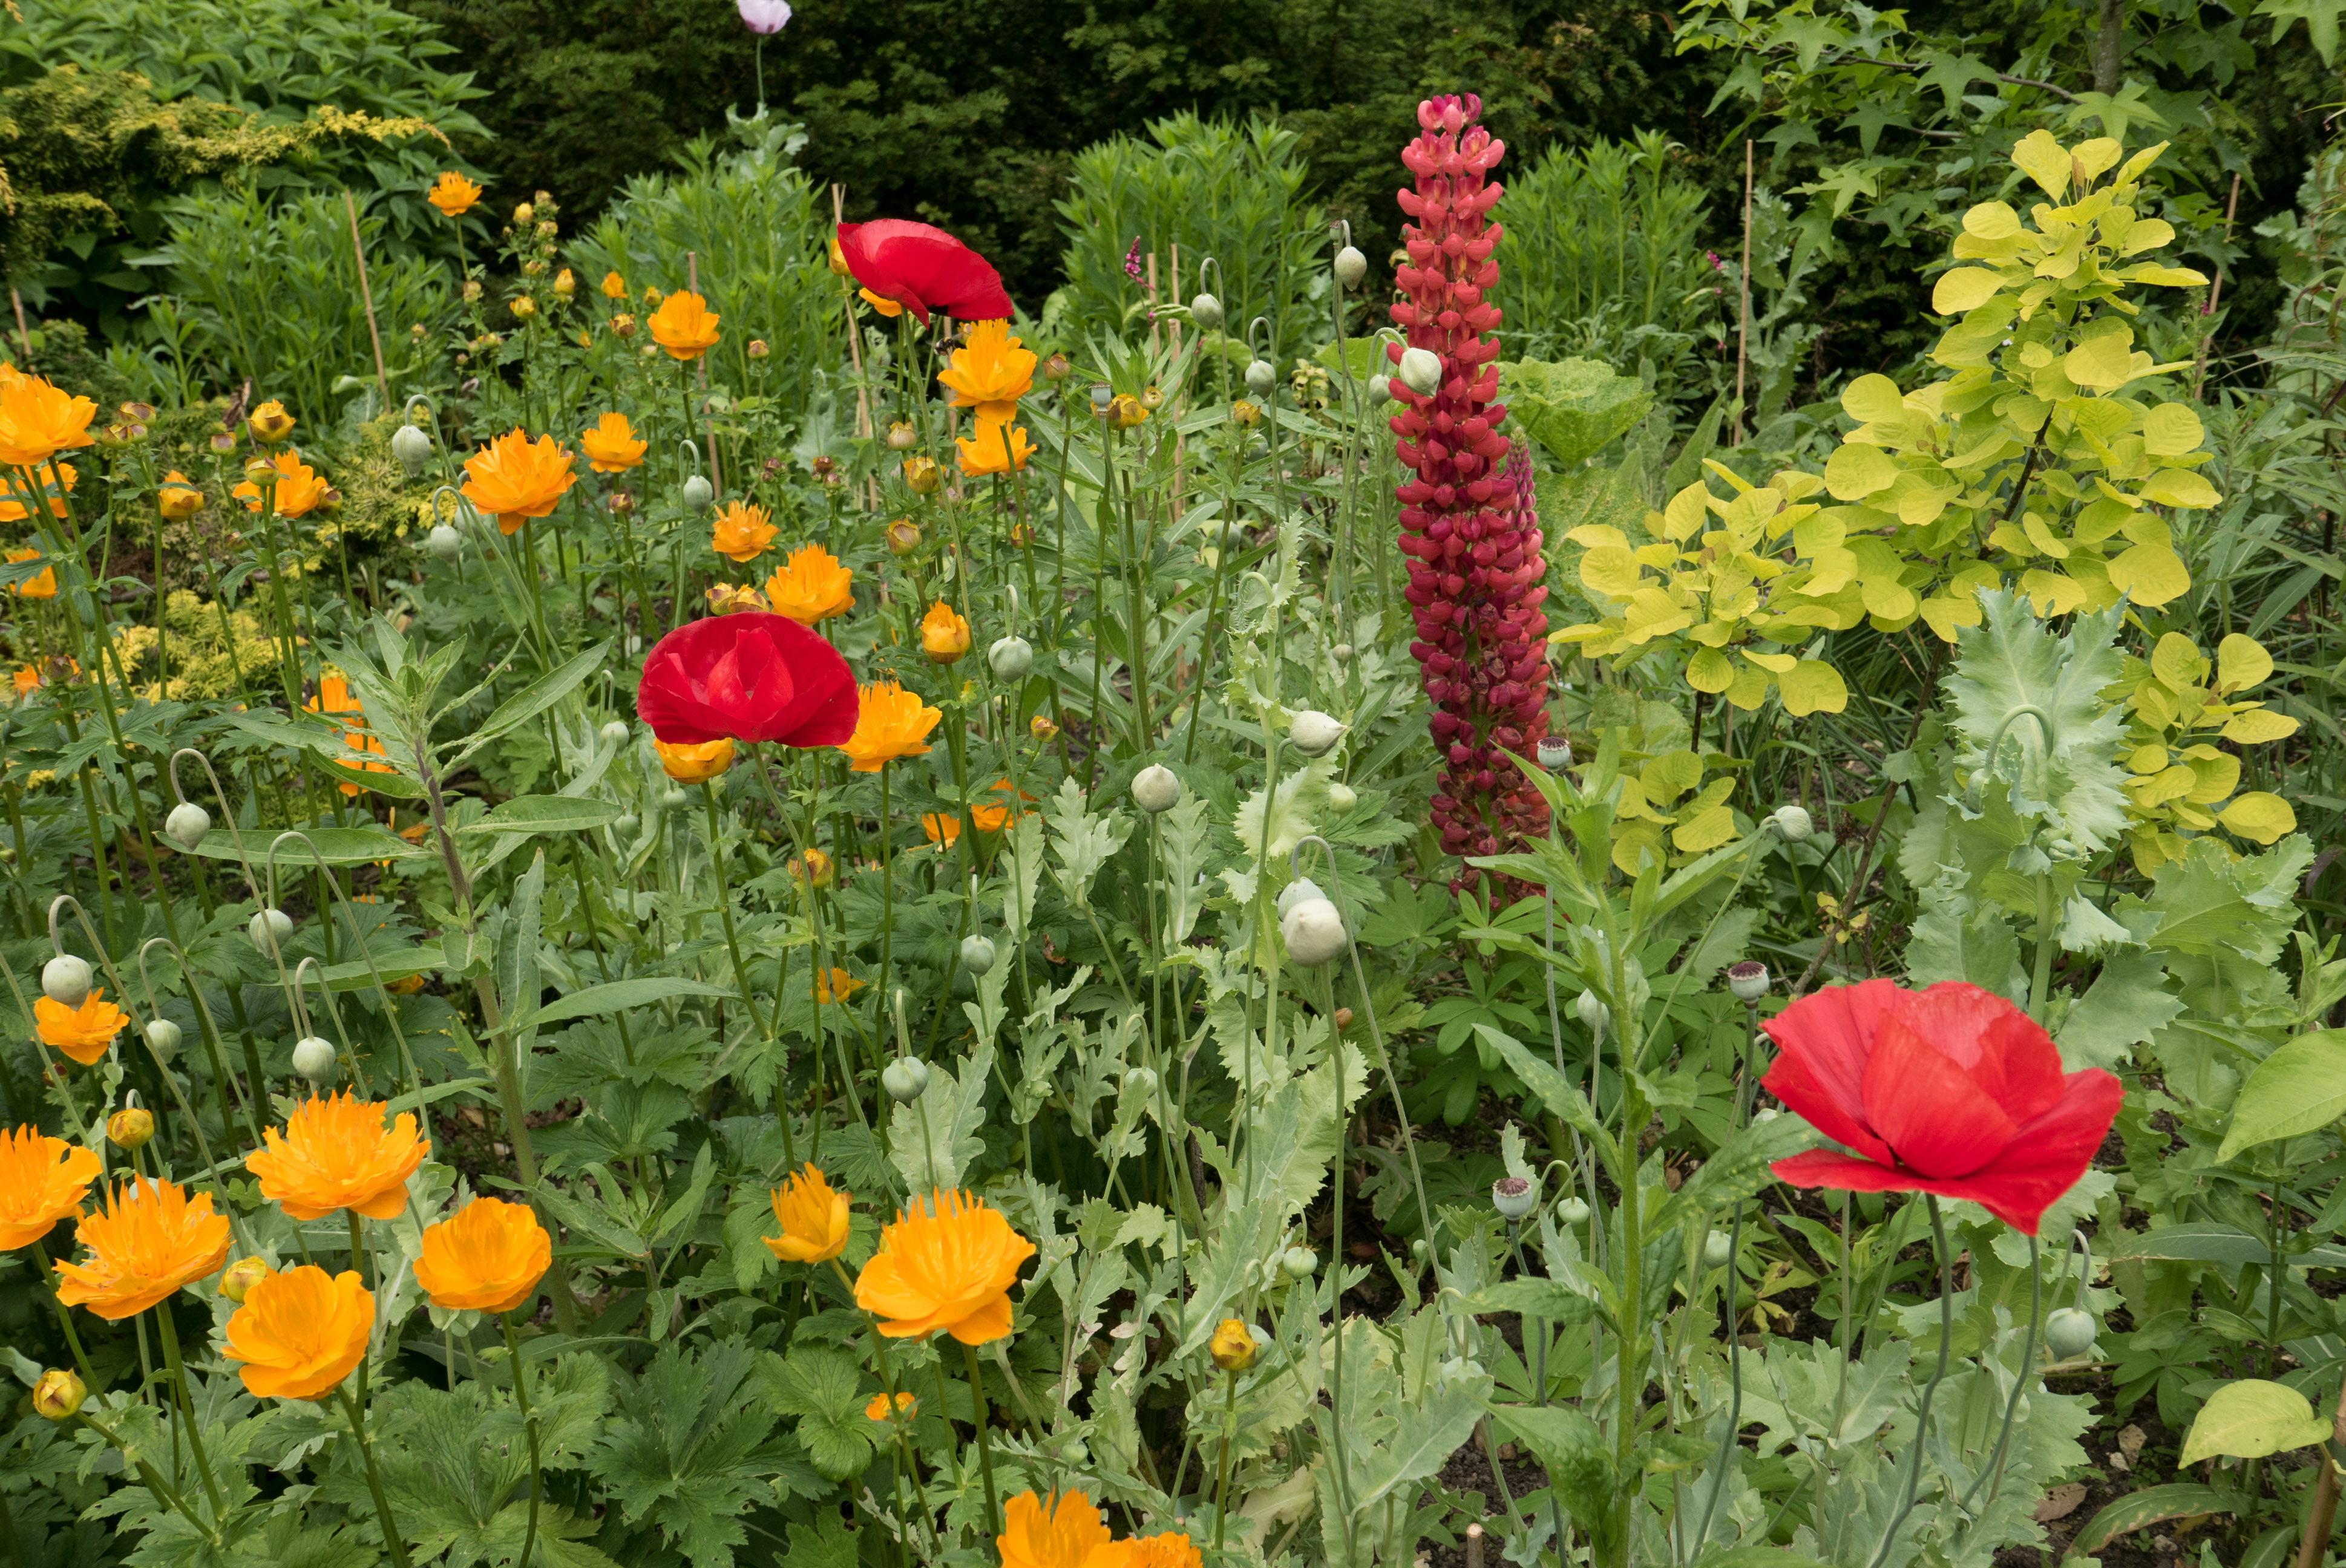 The richness of the plantings at Malverleys make this garden memorable.